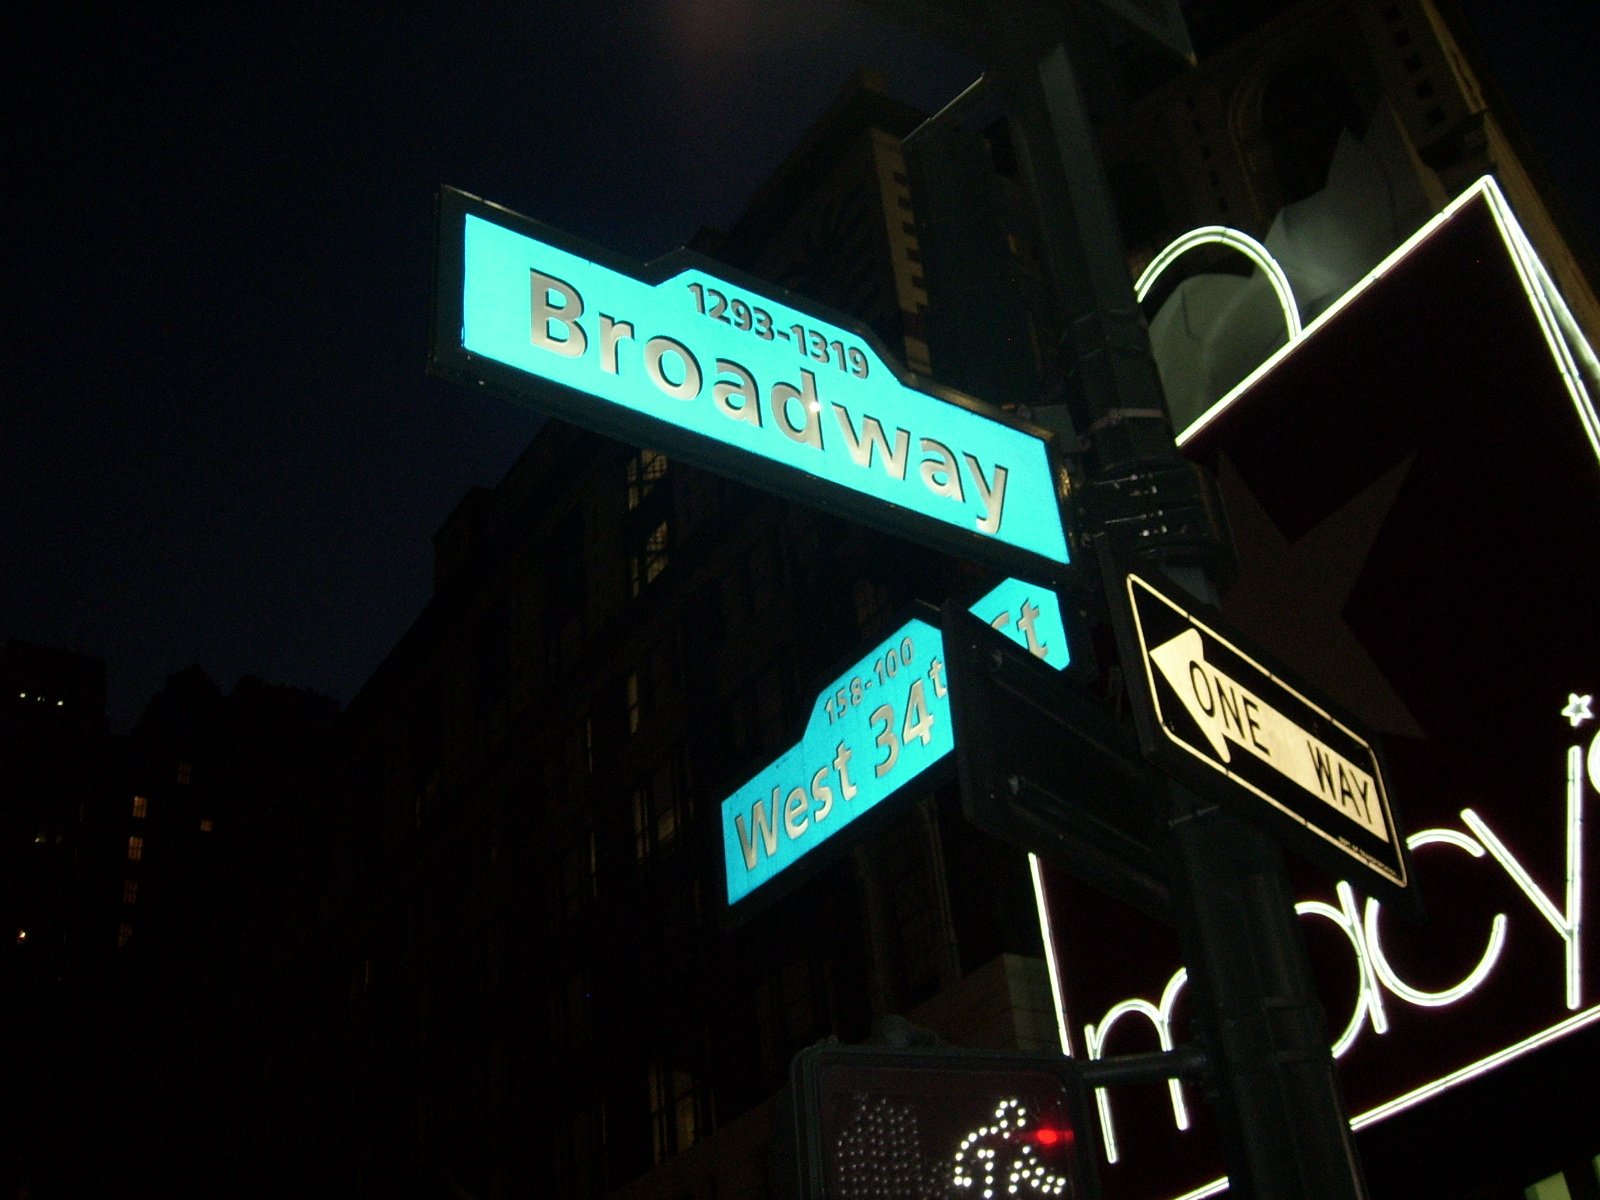 street signs are glowing green at night in front of building